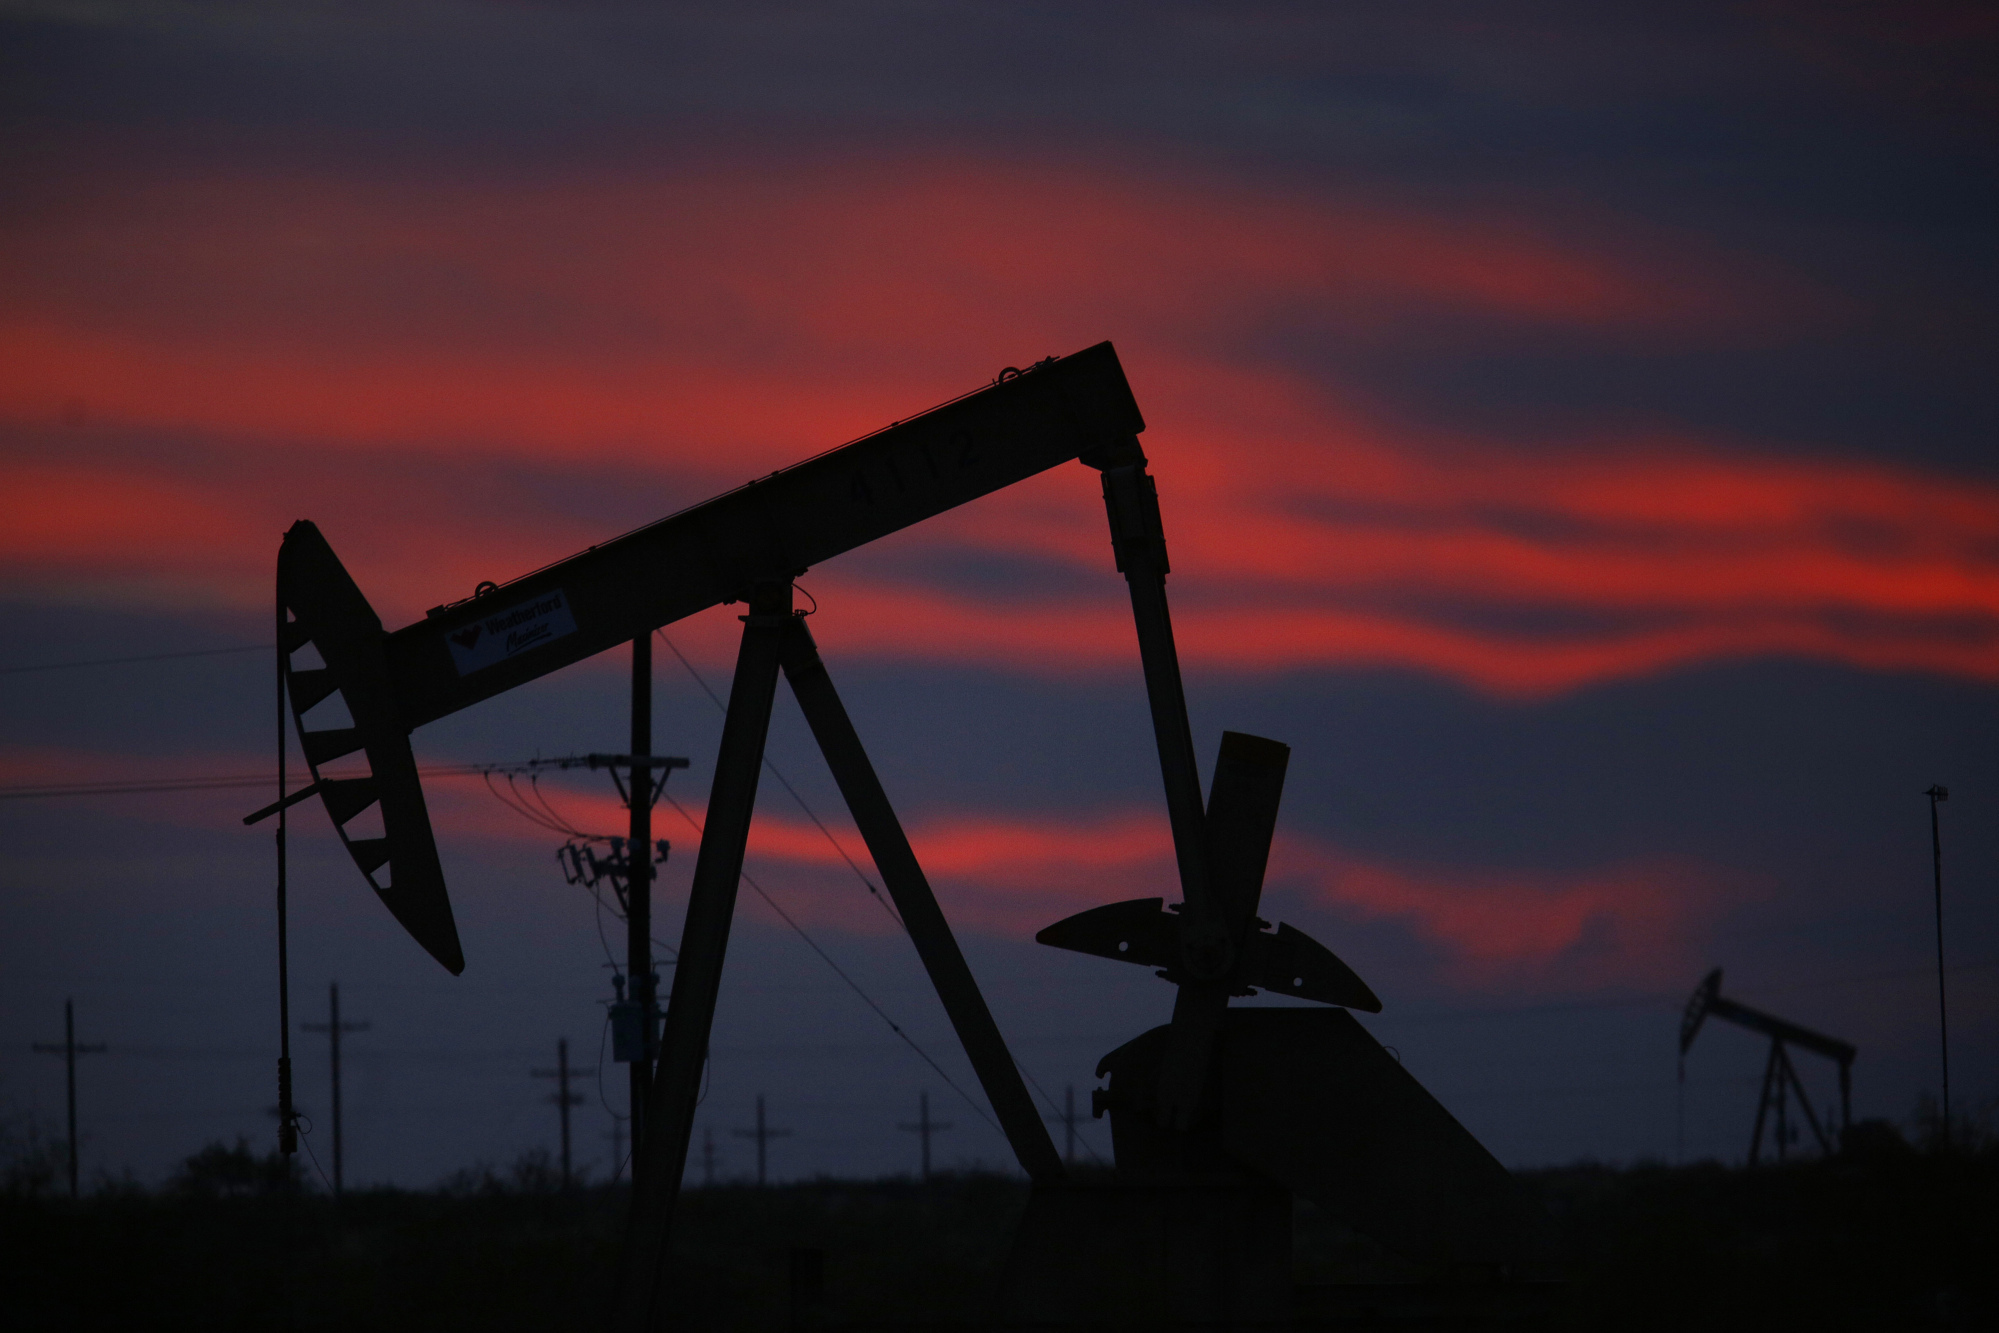 The silhouette of an electric oil pump jack is seen at dusk in the oil fields surrounding Midland, Texas, U.S., on Tuesday, Nov. 7, 2017. Photographer: Luke Sharrett/Bloomberg